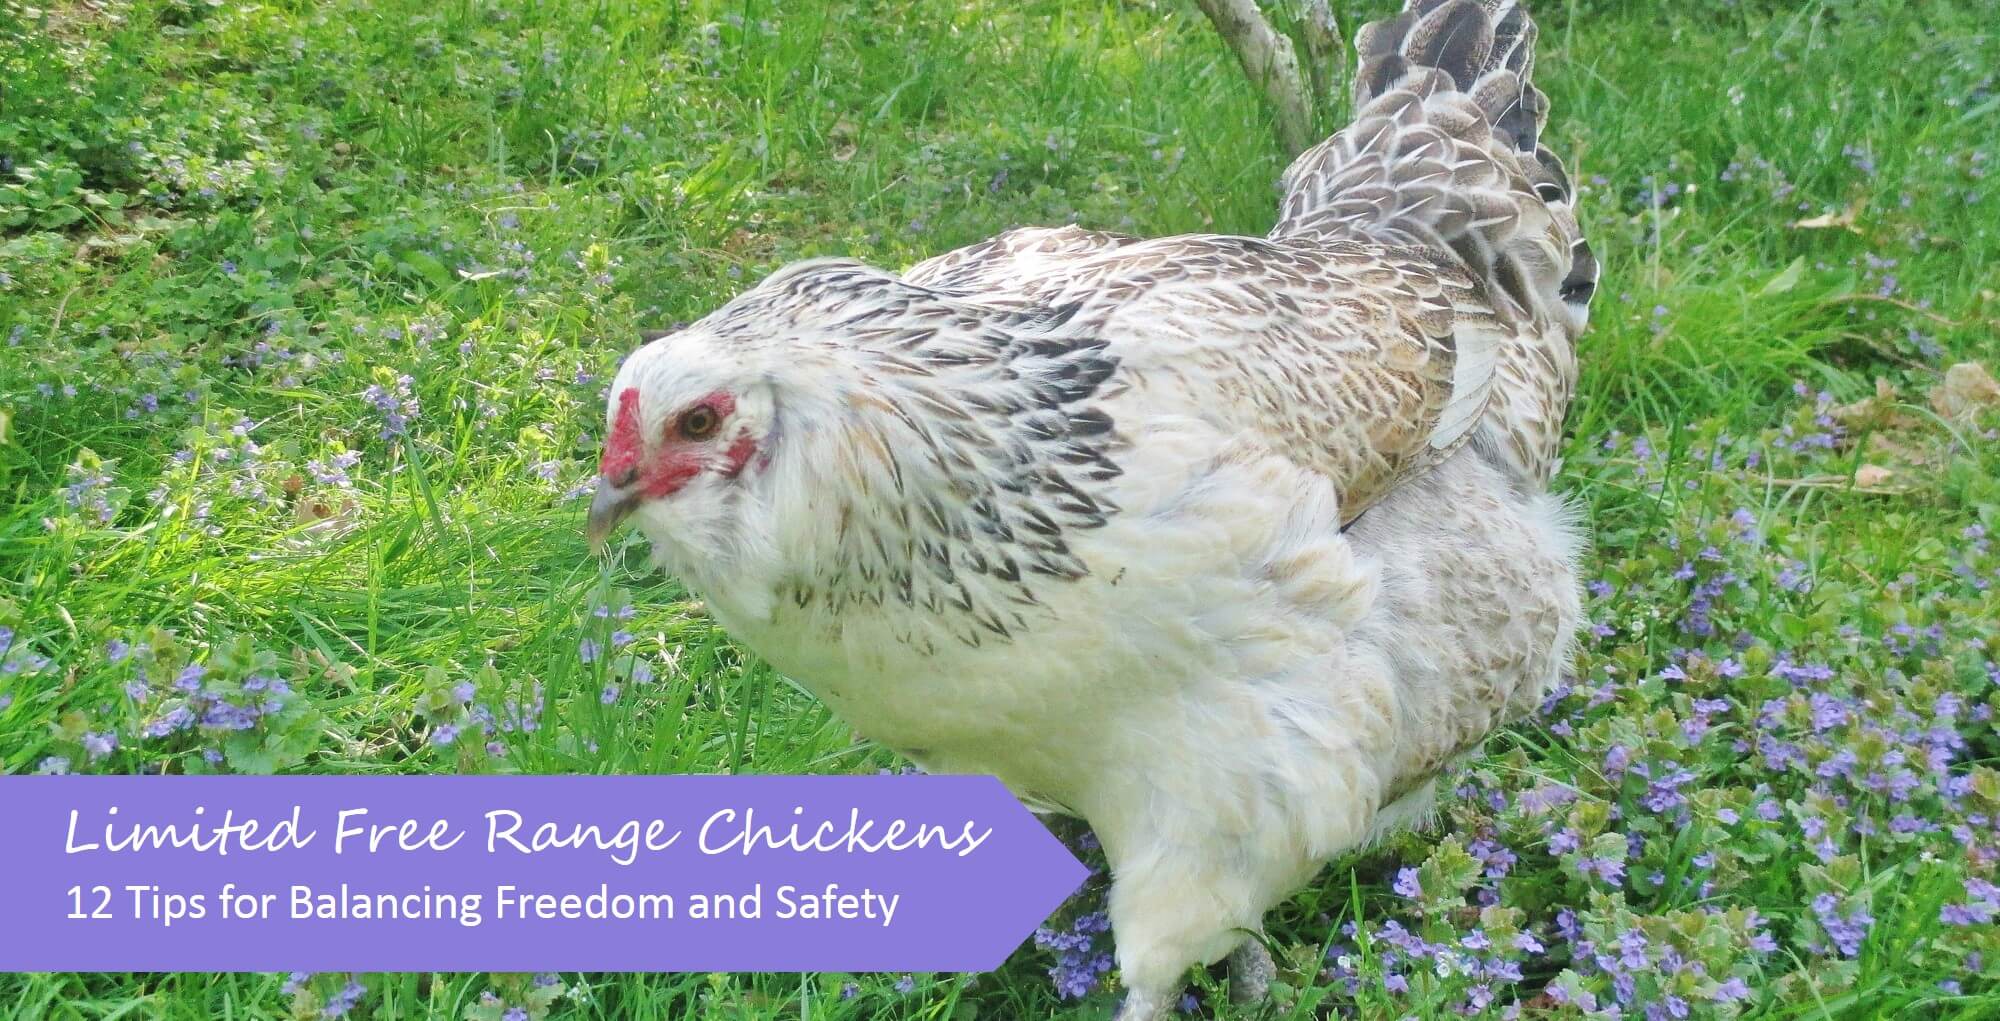 Pam's Backyard Chickens: How to Pick Chicken Breeds for Your Flock